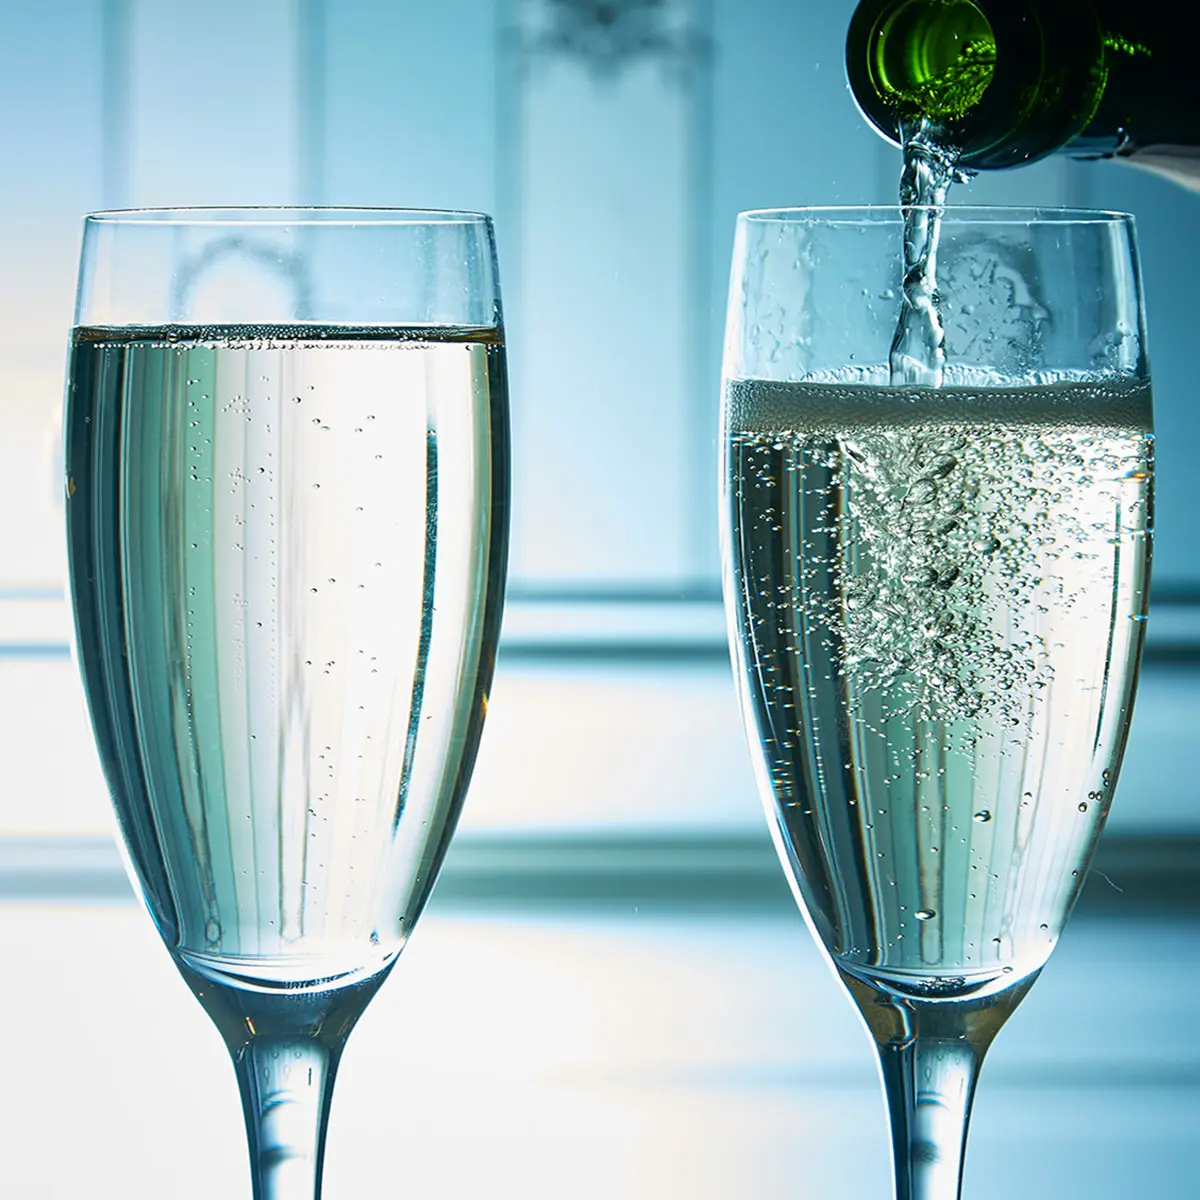 A close up of a pair of Champagne glasses